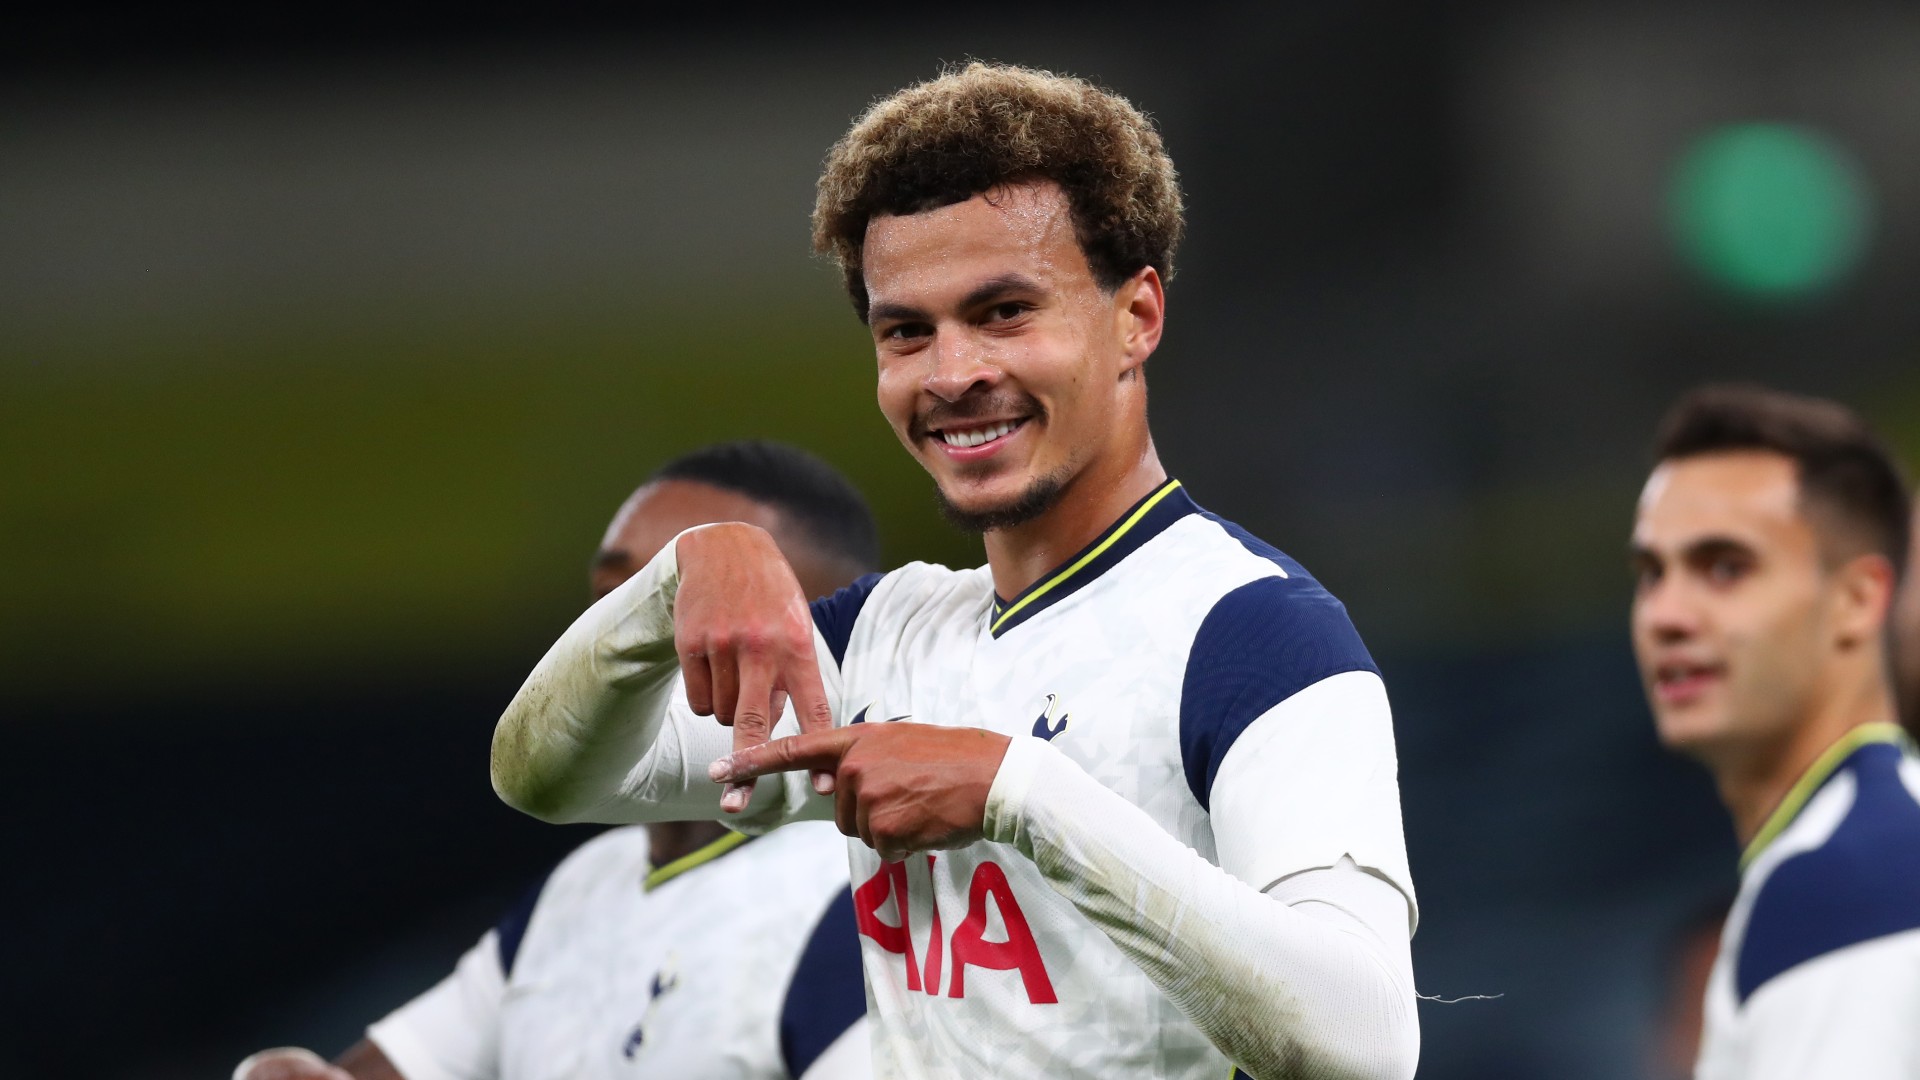 PSG remain in talks over Alli loan move as Tottenham seek replacement for England midfielder